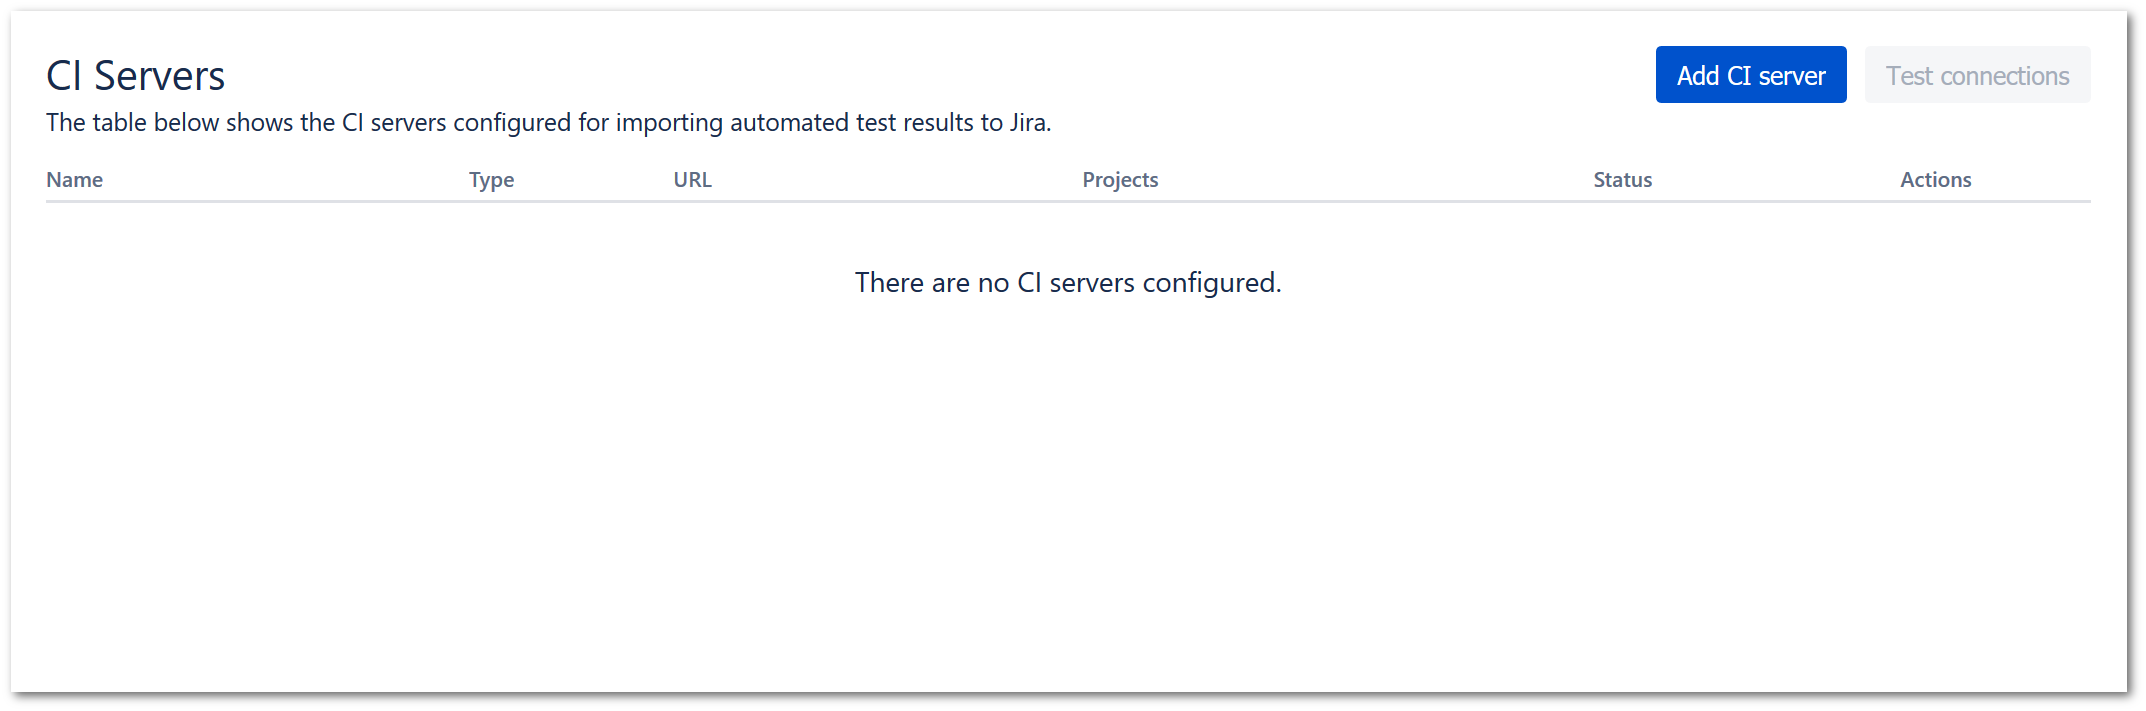 CI Servers configuration in TestFLO - Test Management for Jira